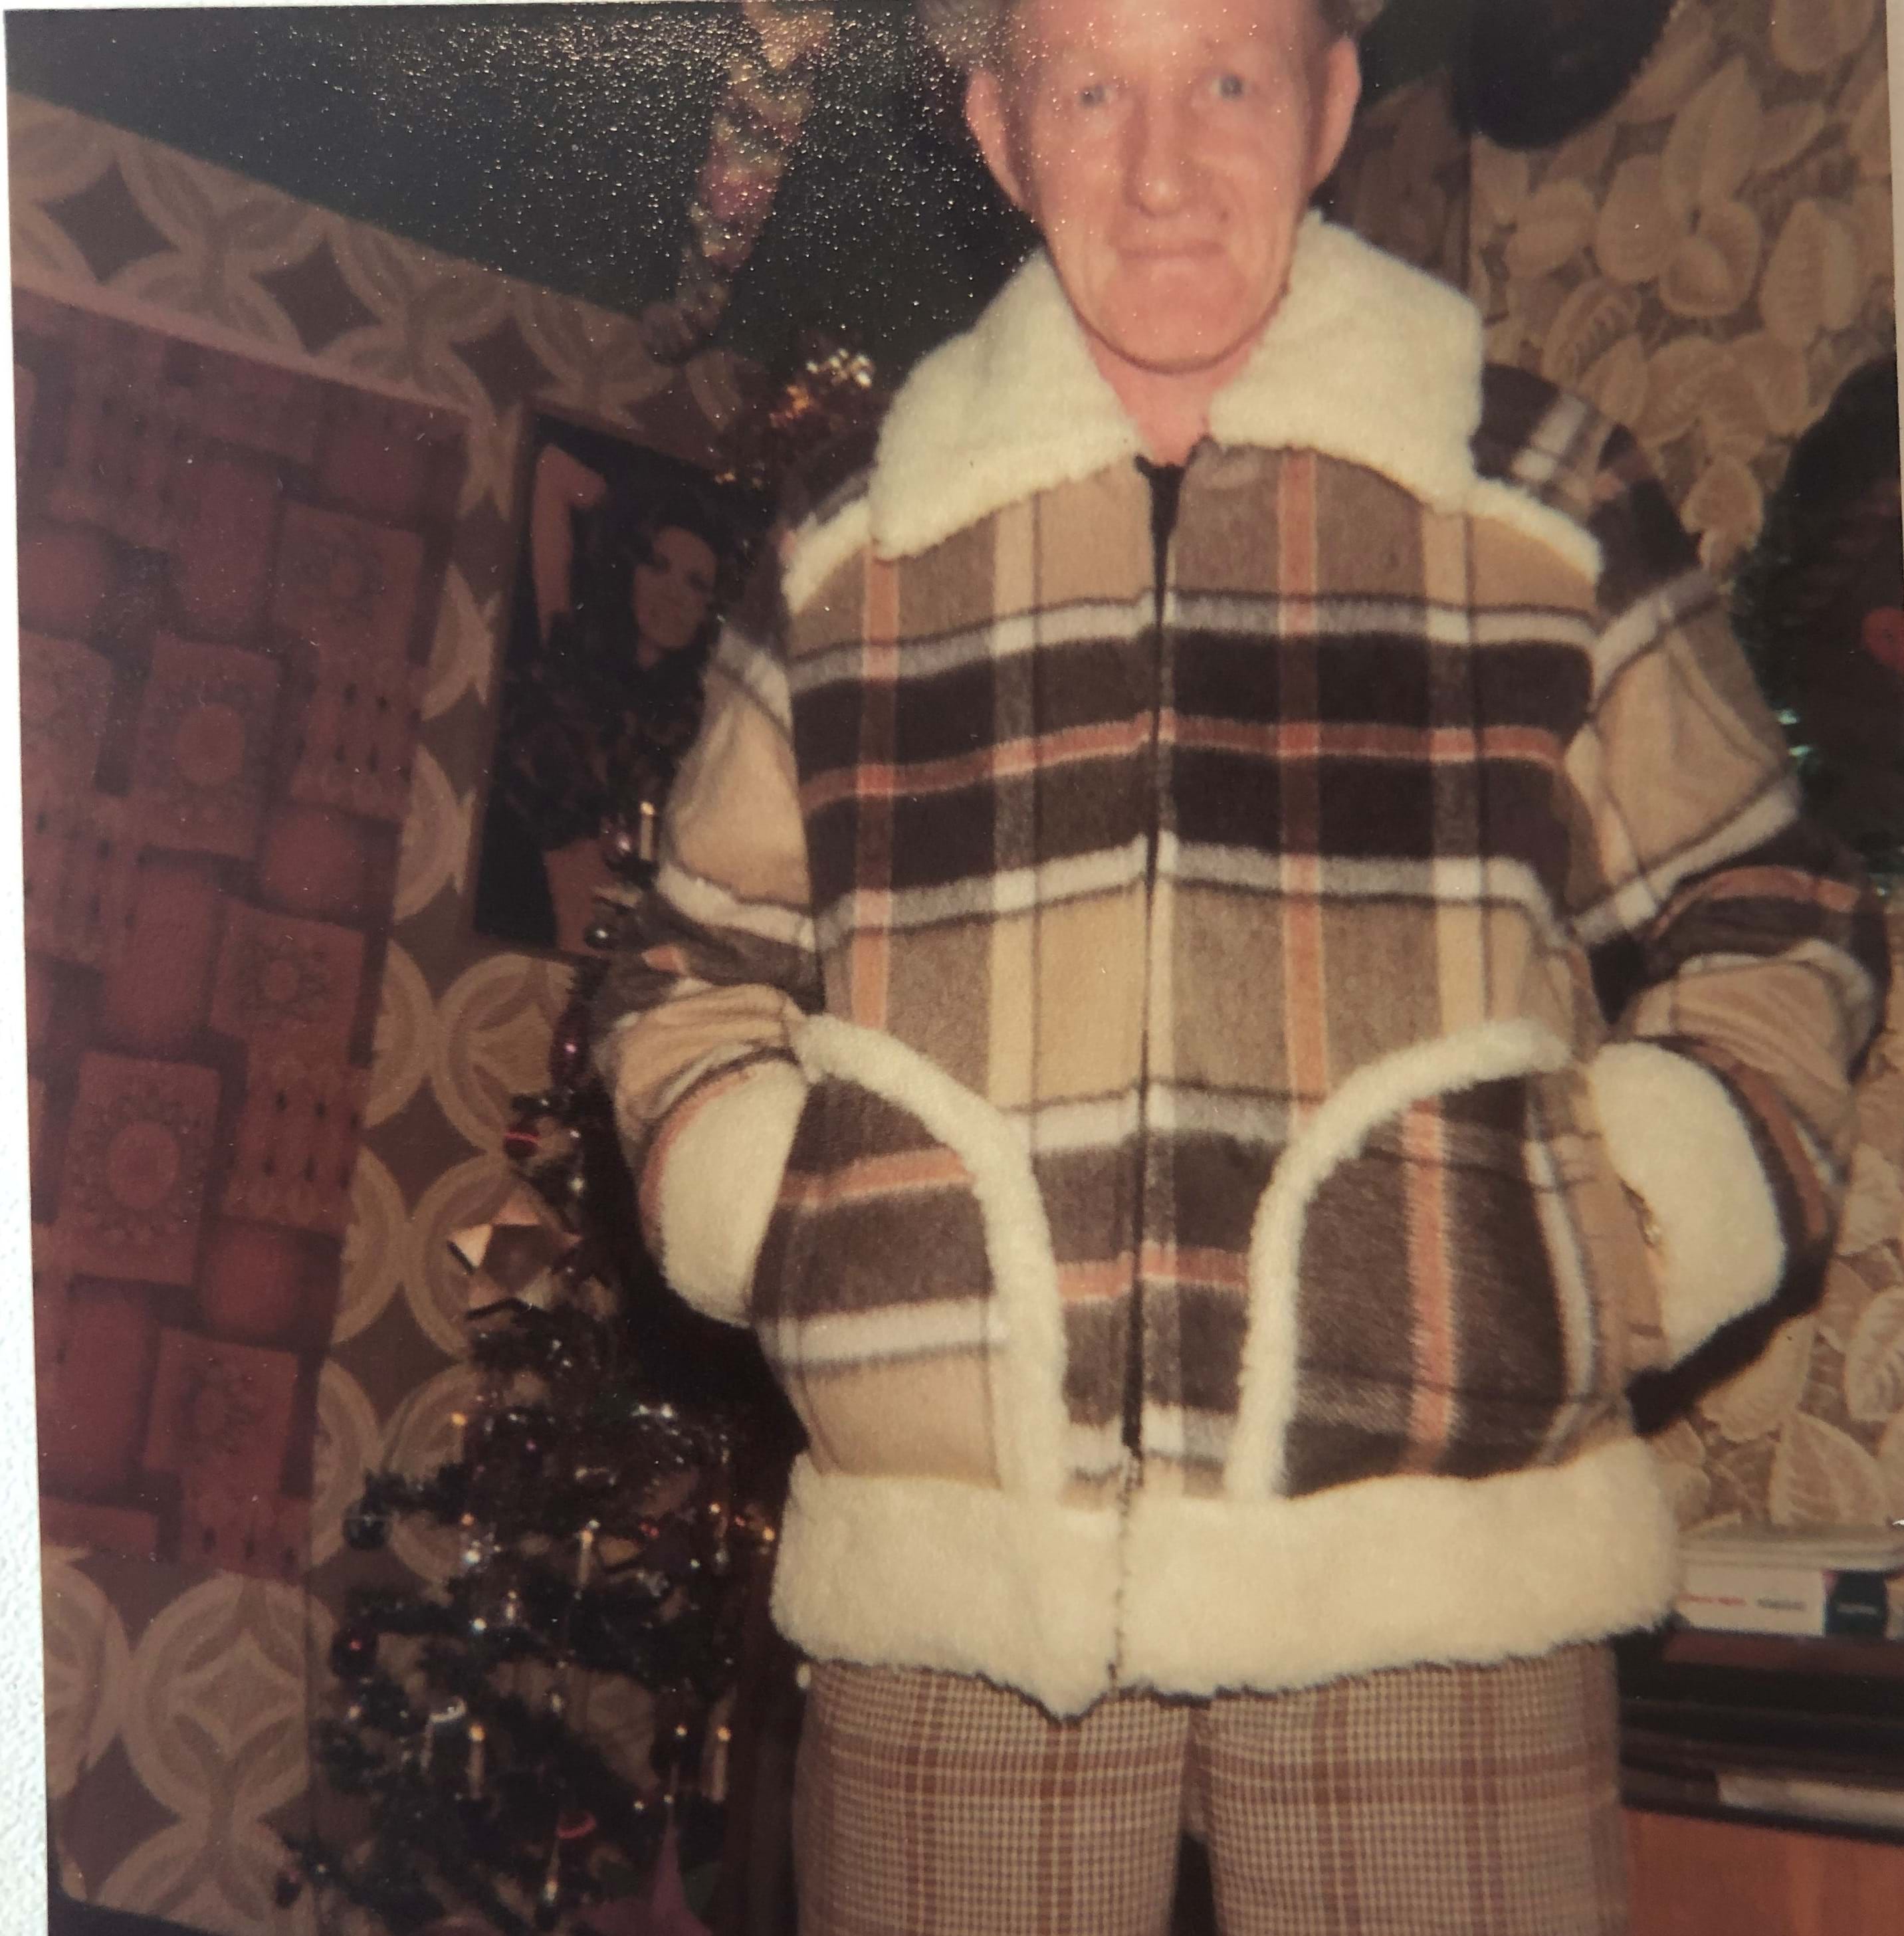 Edward Smith at Christmas, before he passed away from mesothelioma